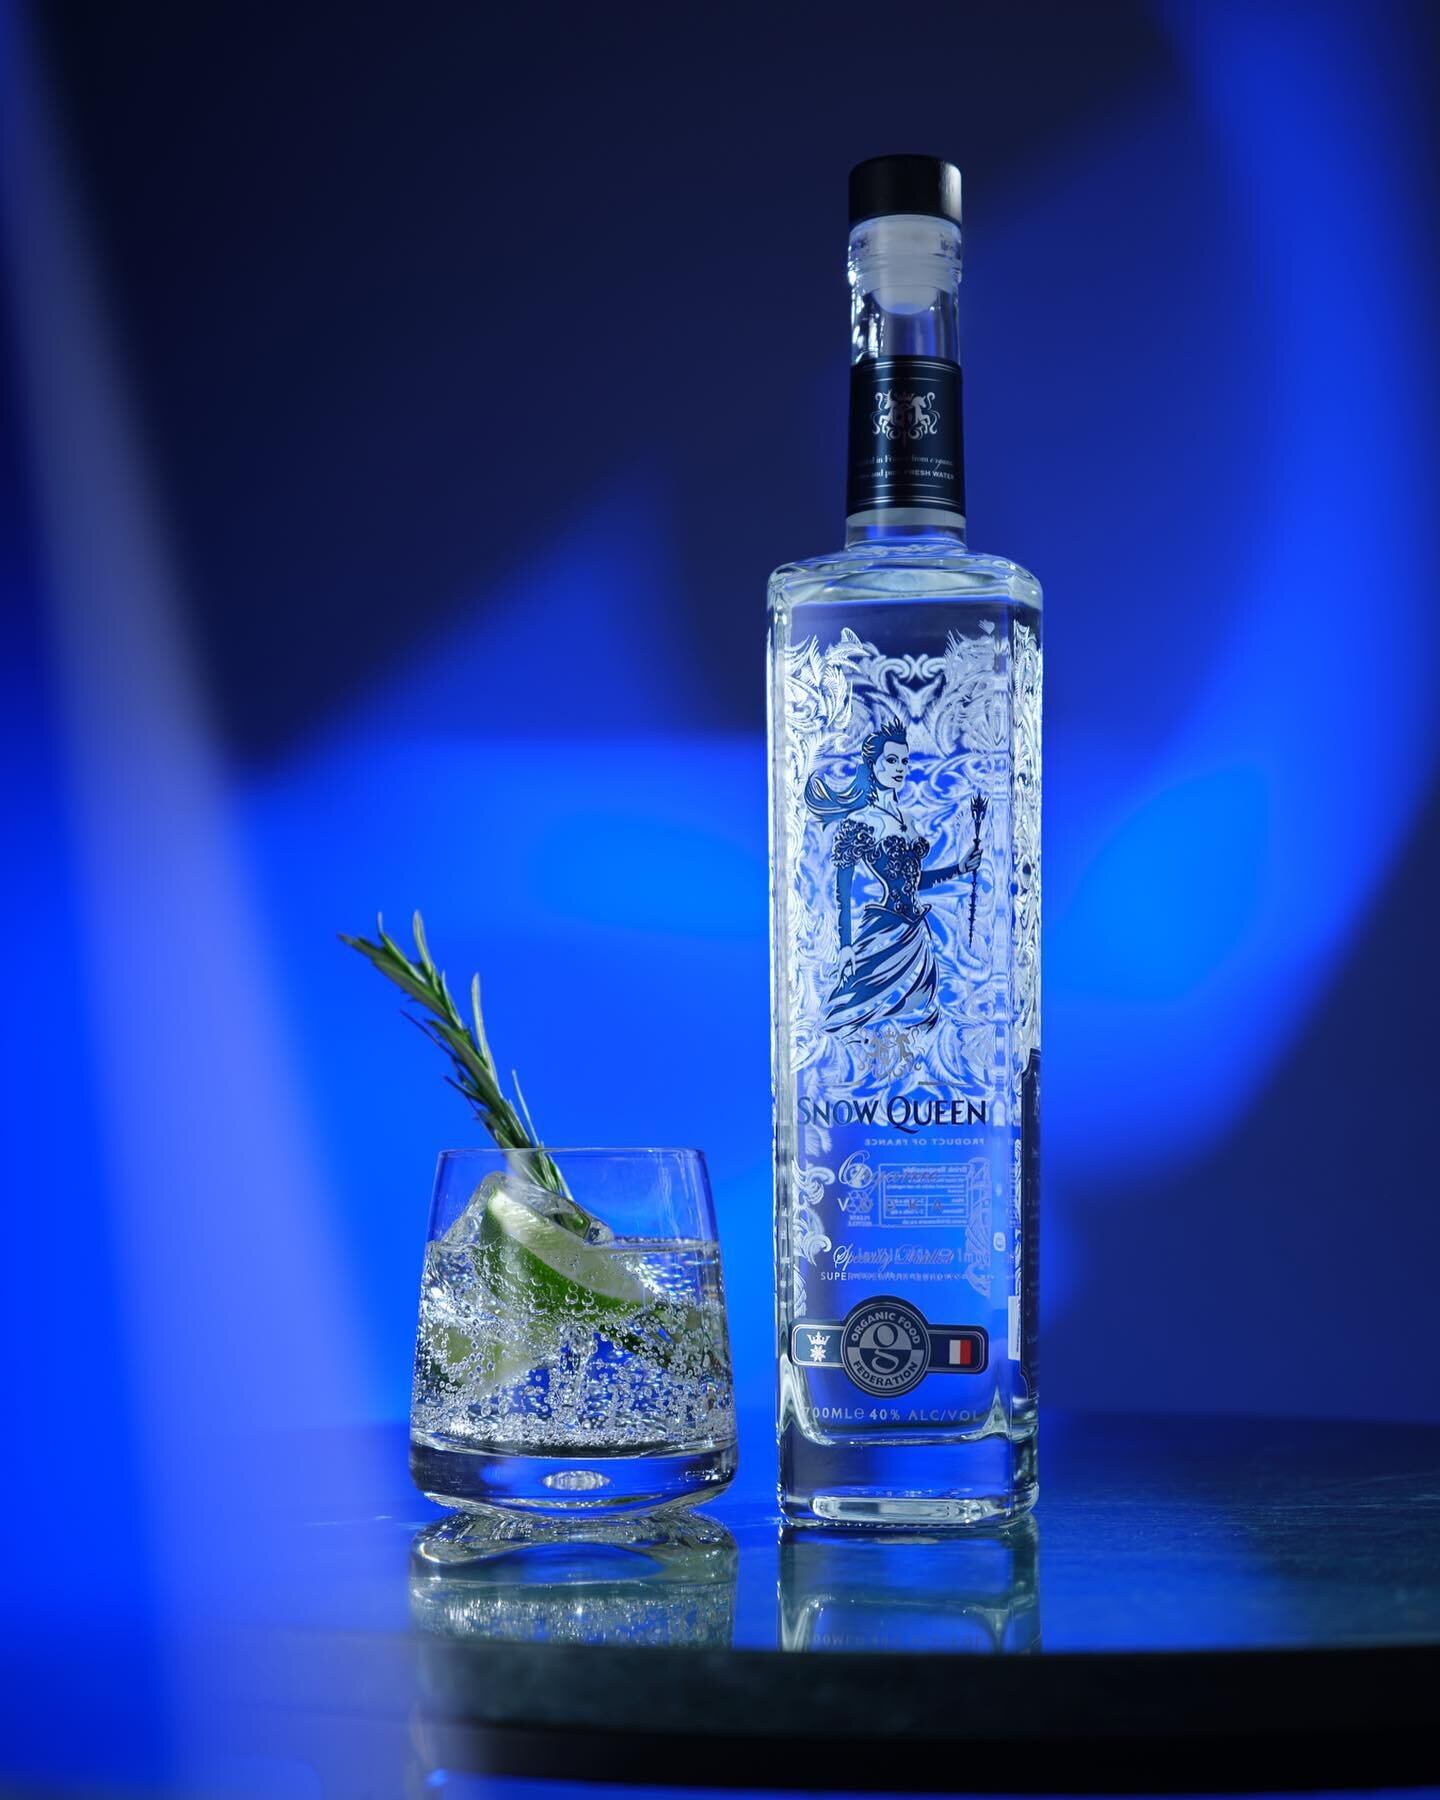 Friday night fever from the archives #creativedrinksphotography #productphotography #vodka #fridaynightfever #londonproductphotographer #studiophotography